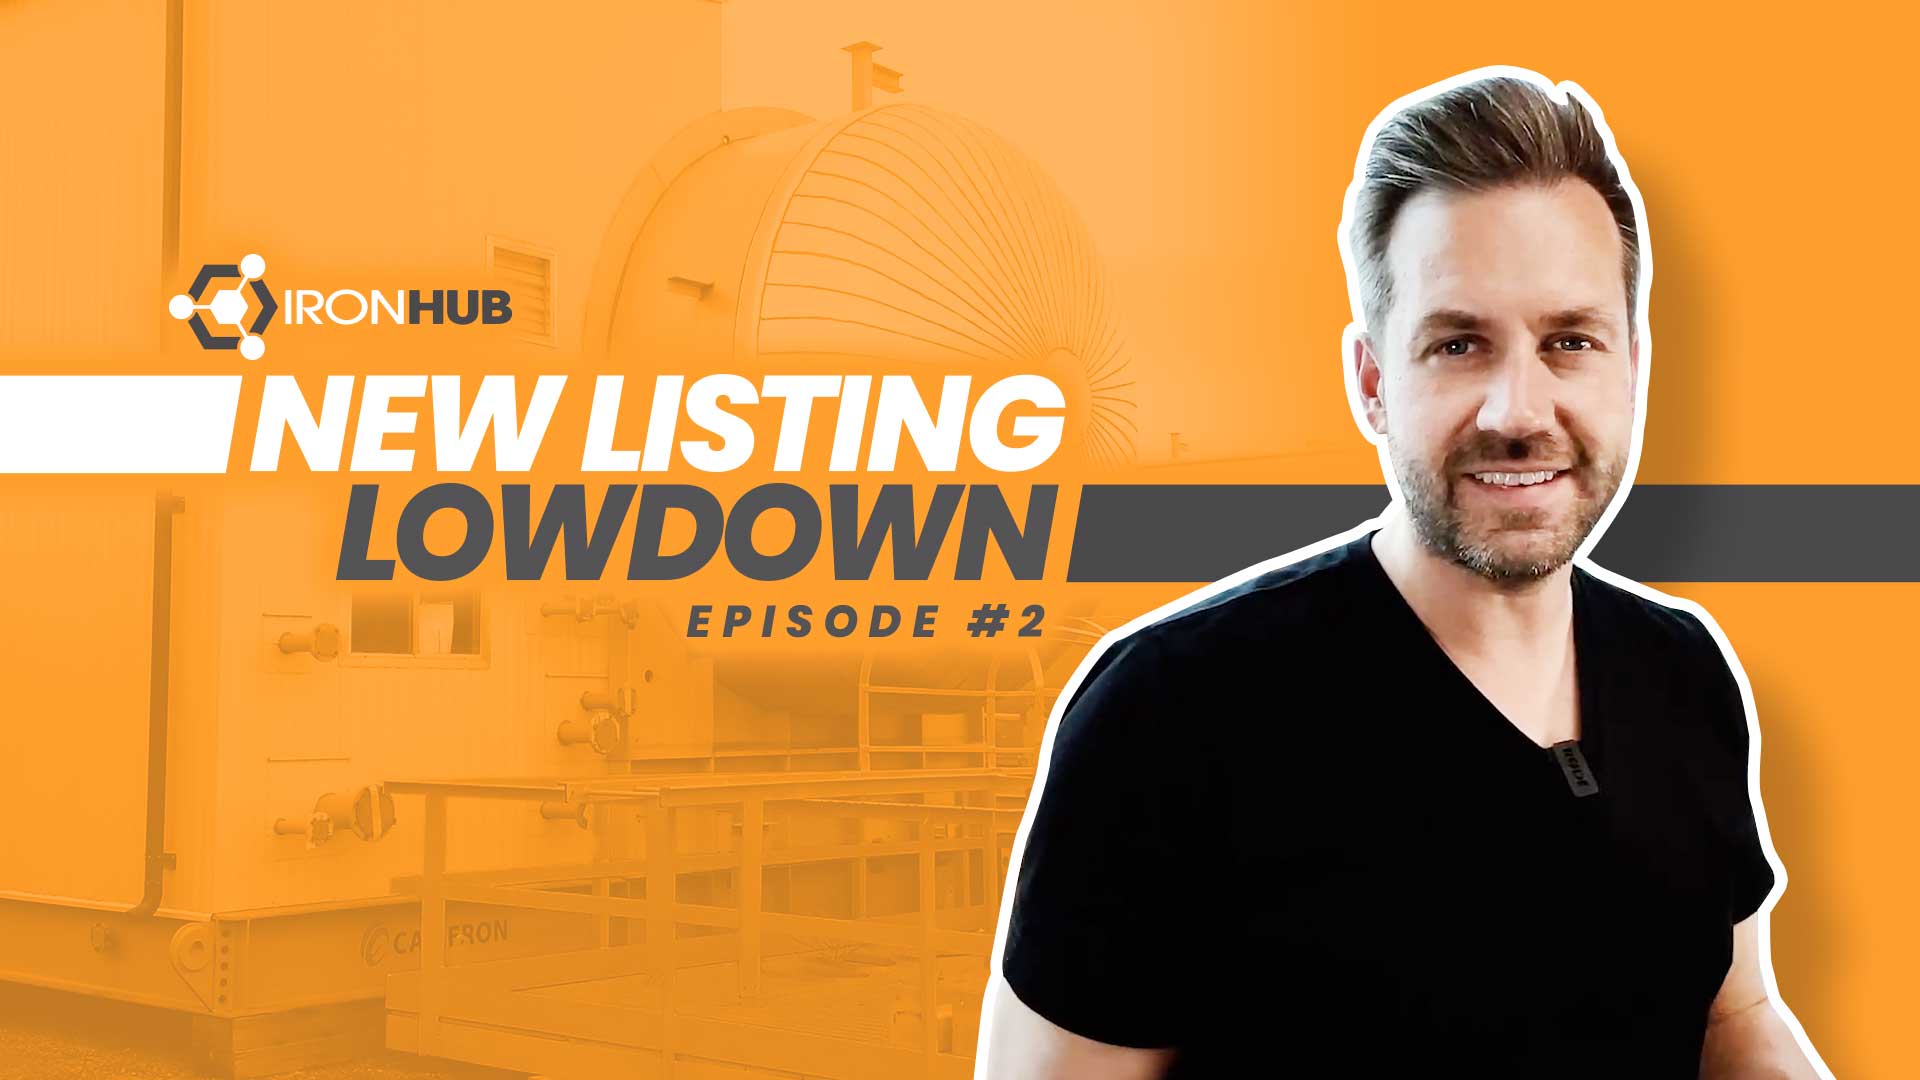 Episode #2 Now Out! "New Listing Lowdown" Used Surplus Oilfield Oil & Gas Energy Equipment Collaboration with The IronHub